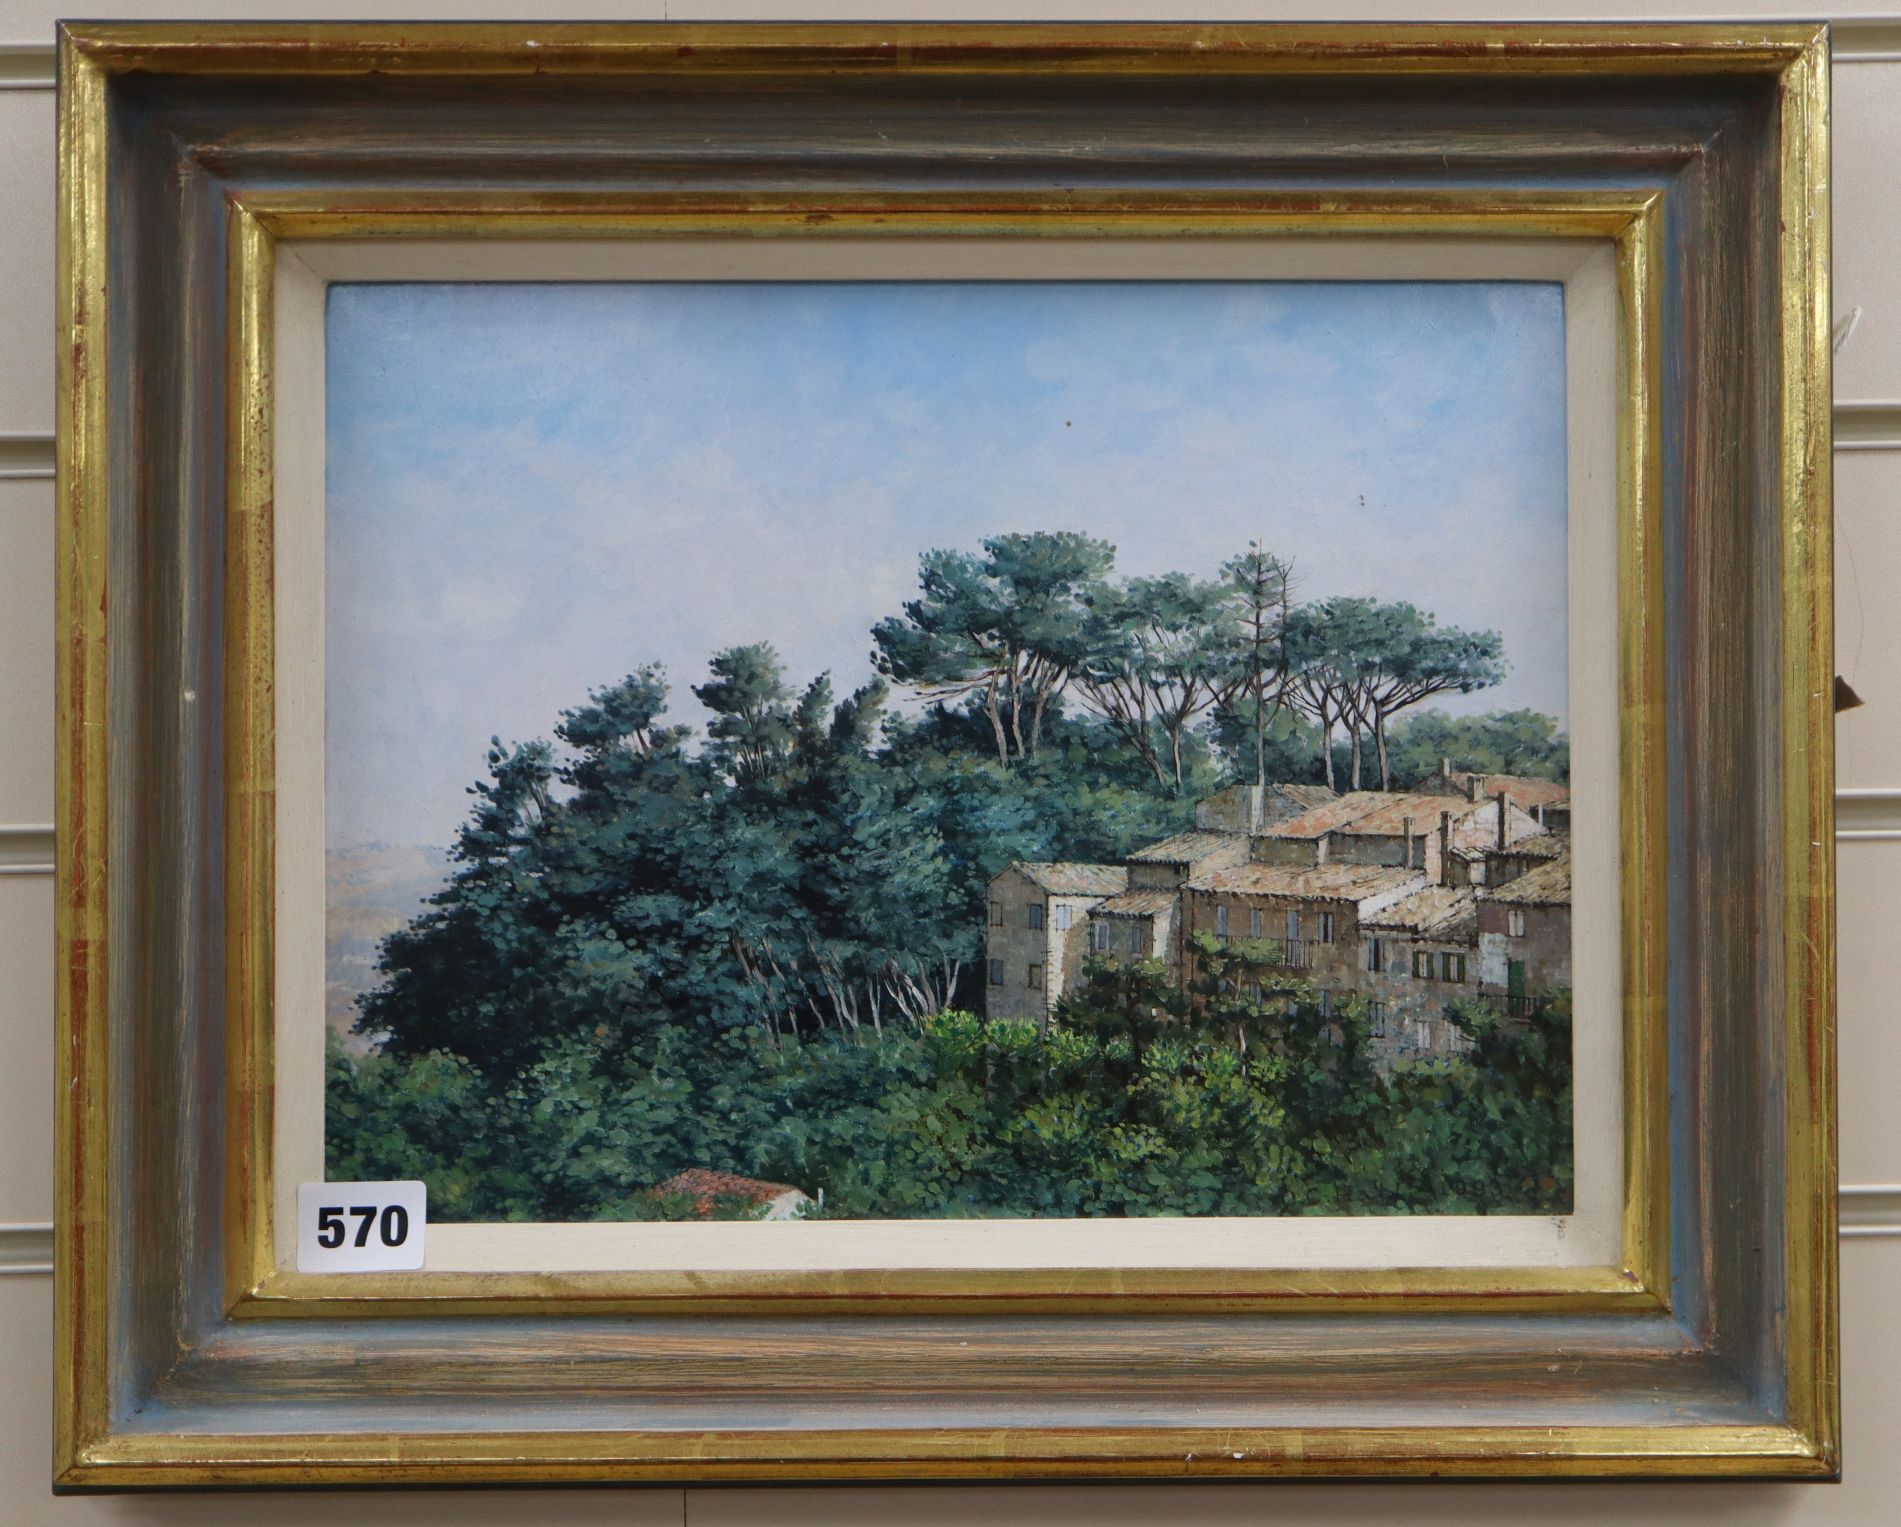 Christopher Hall (1930-2016), 'Parco Colloredo, Recanati', signed and dated 1993, oil on board, 23cm